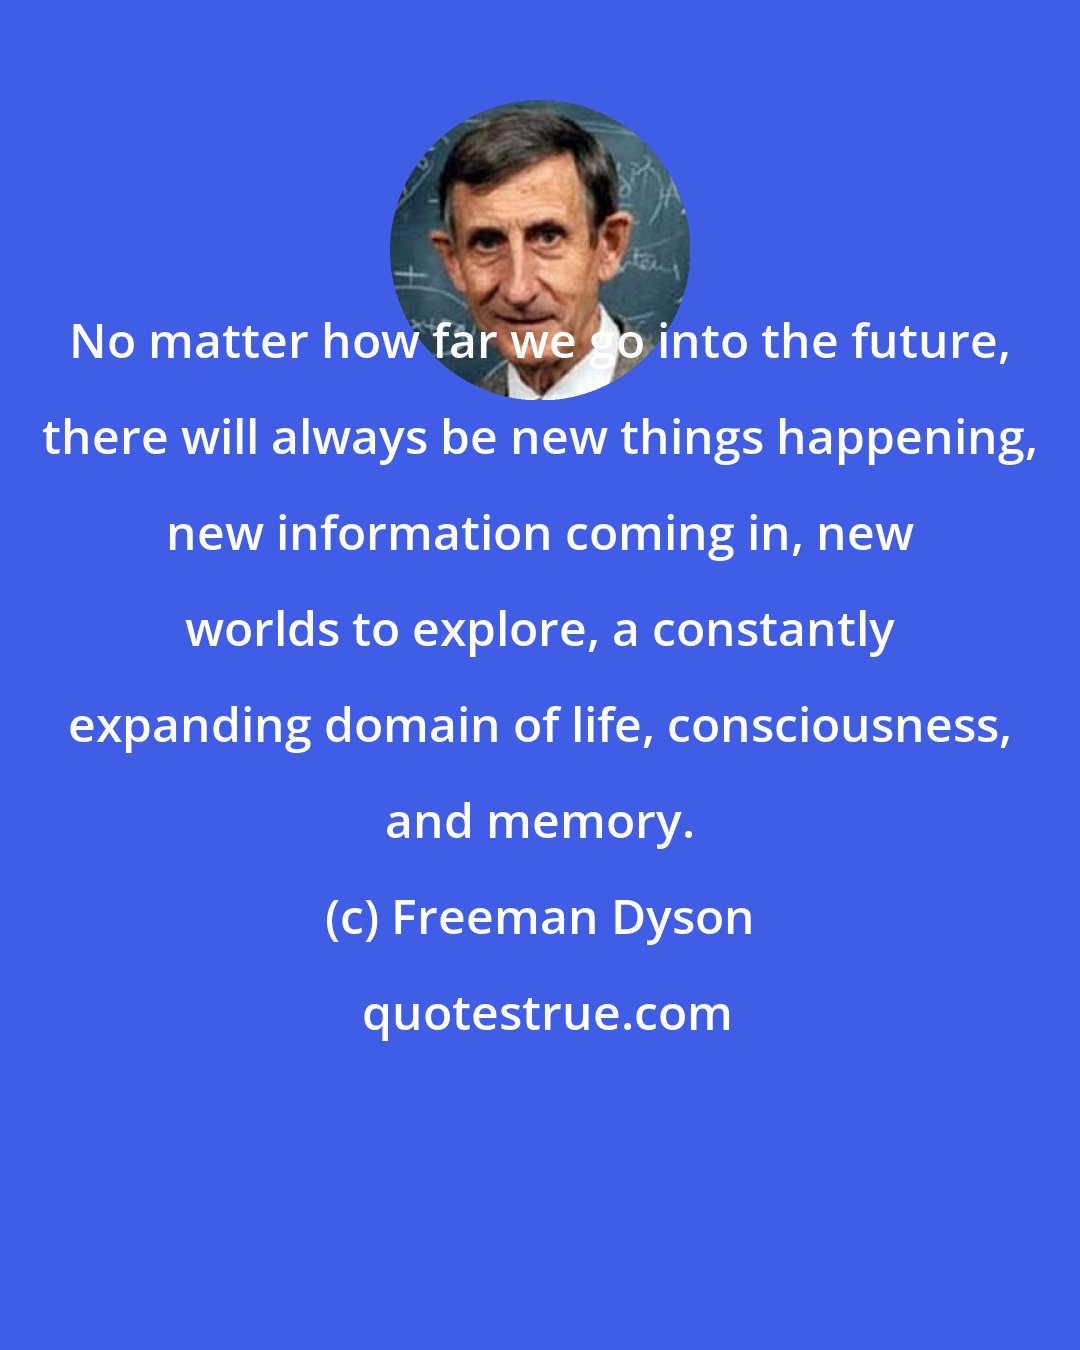 Freeman Dyson: No matter how far we go into the future, there will always be new things happening, new information coming in, new worlds to explore, a constantly expanding domain of life, consciousness, and memory.